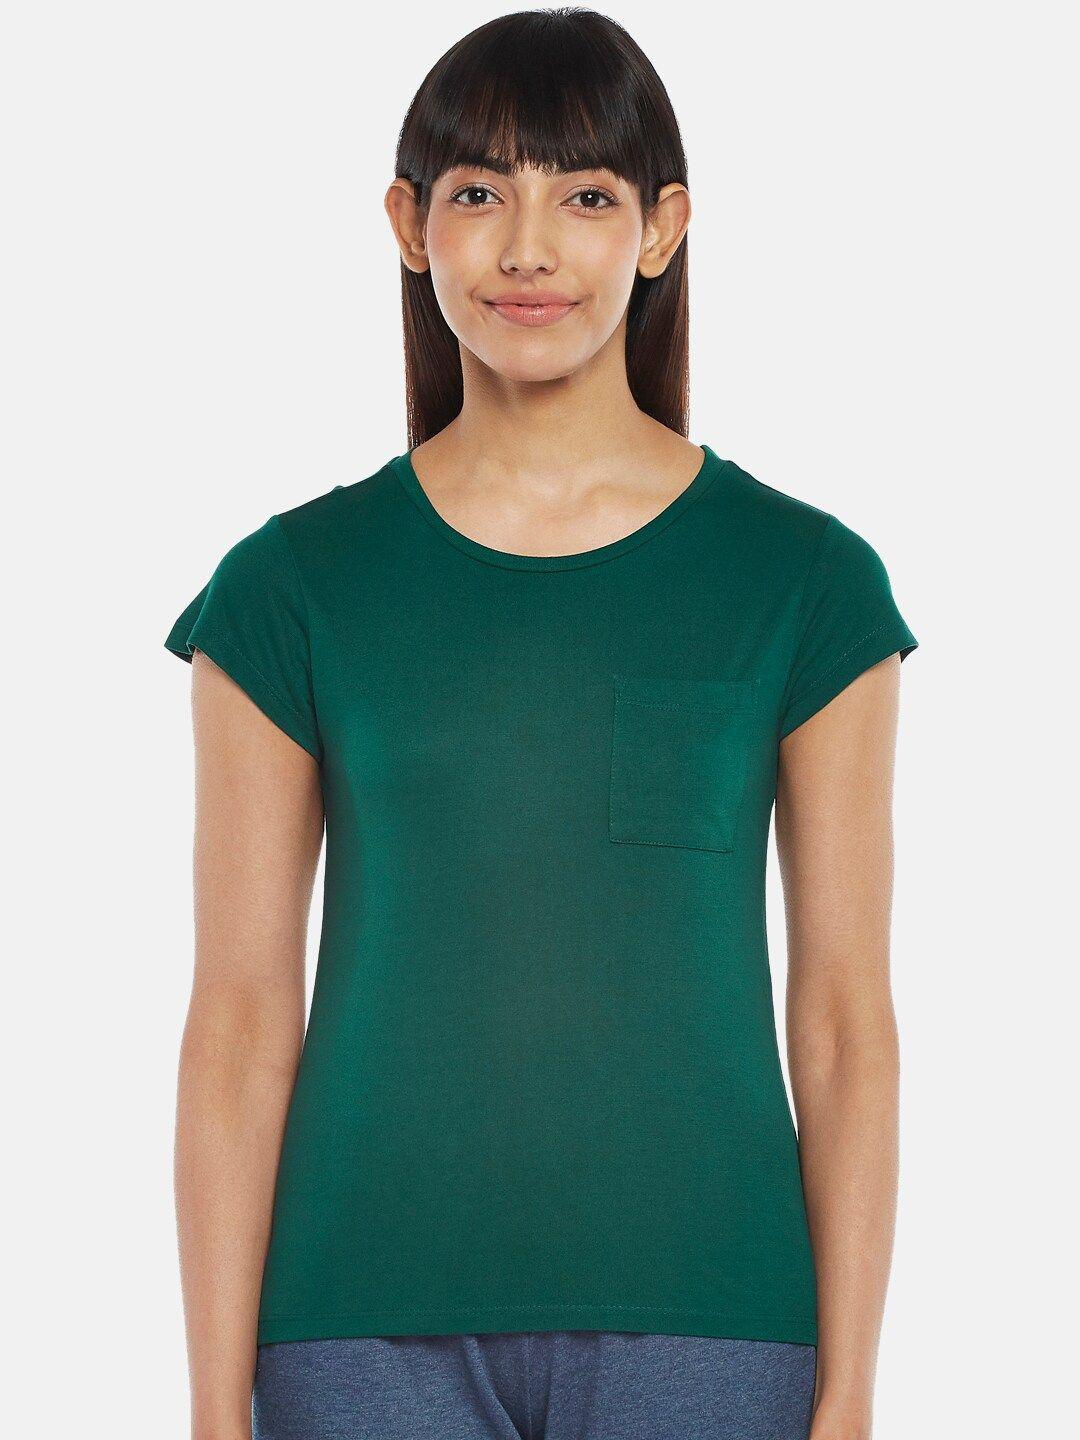 dreamz-by-pantaloons-women-round-neck-short-sleeve-green-top